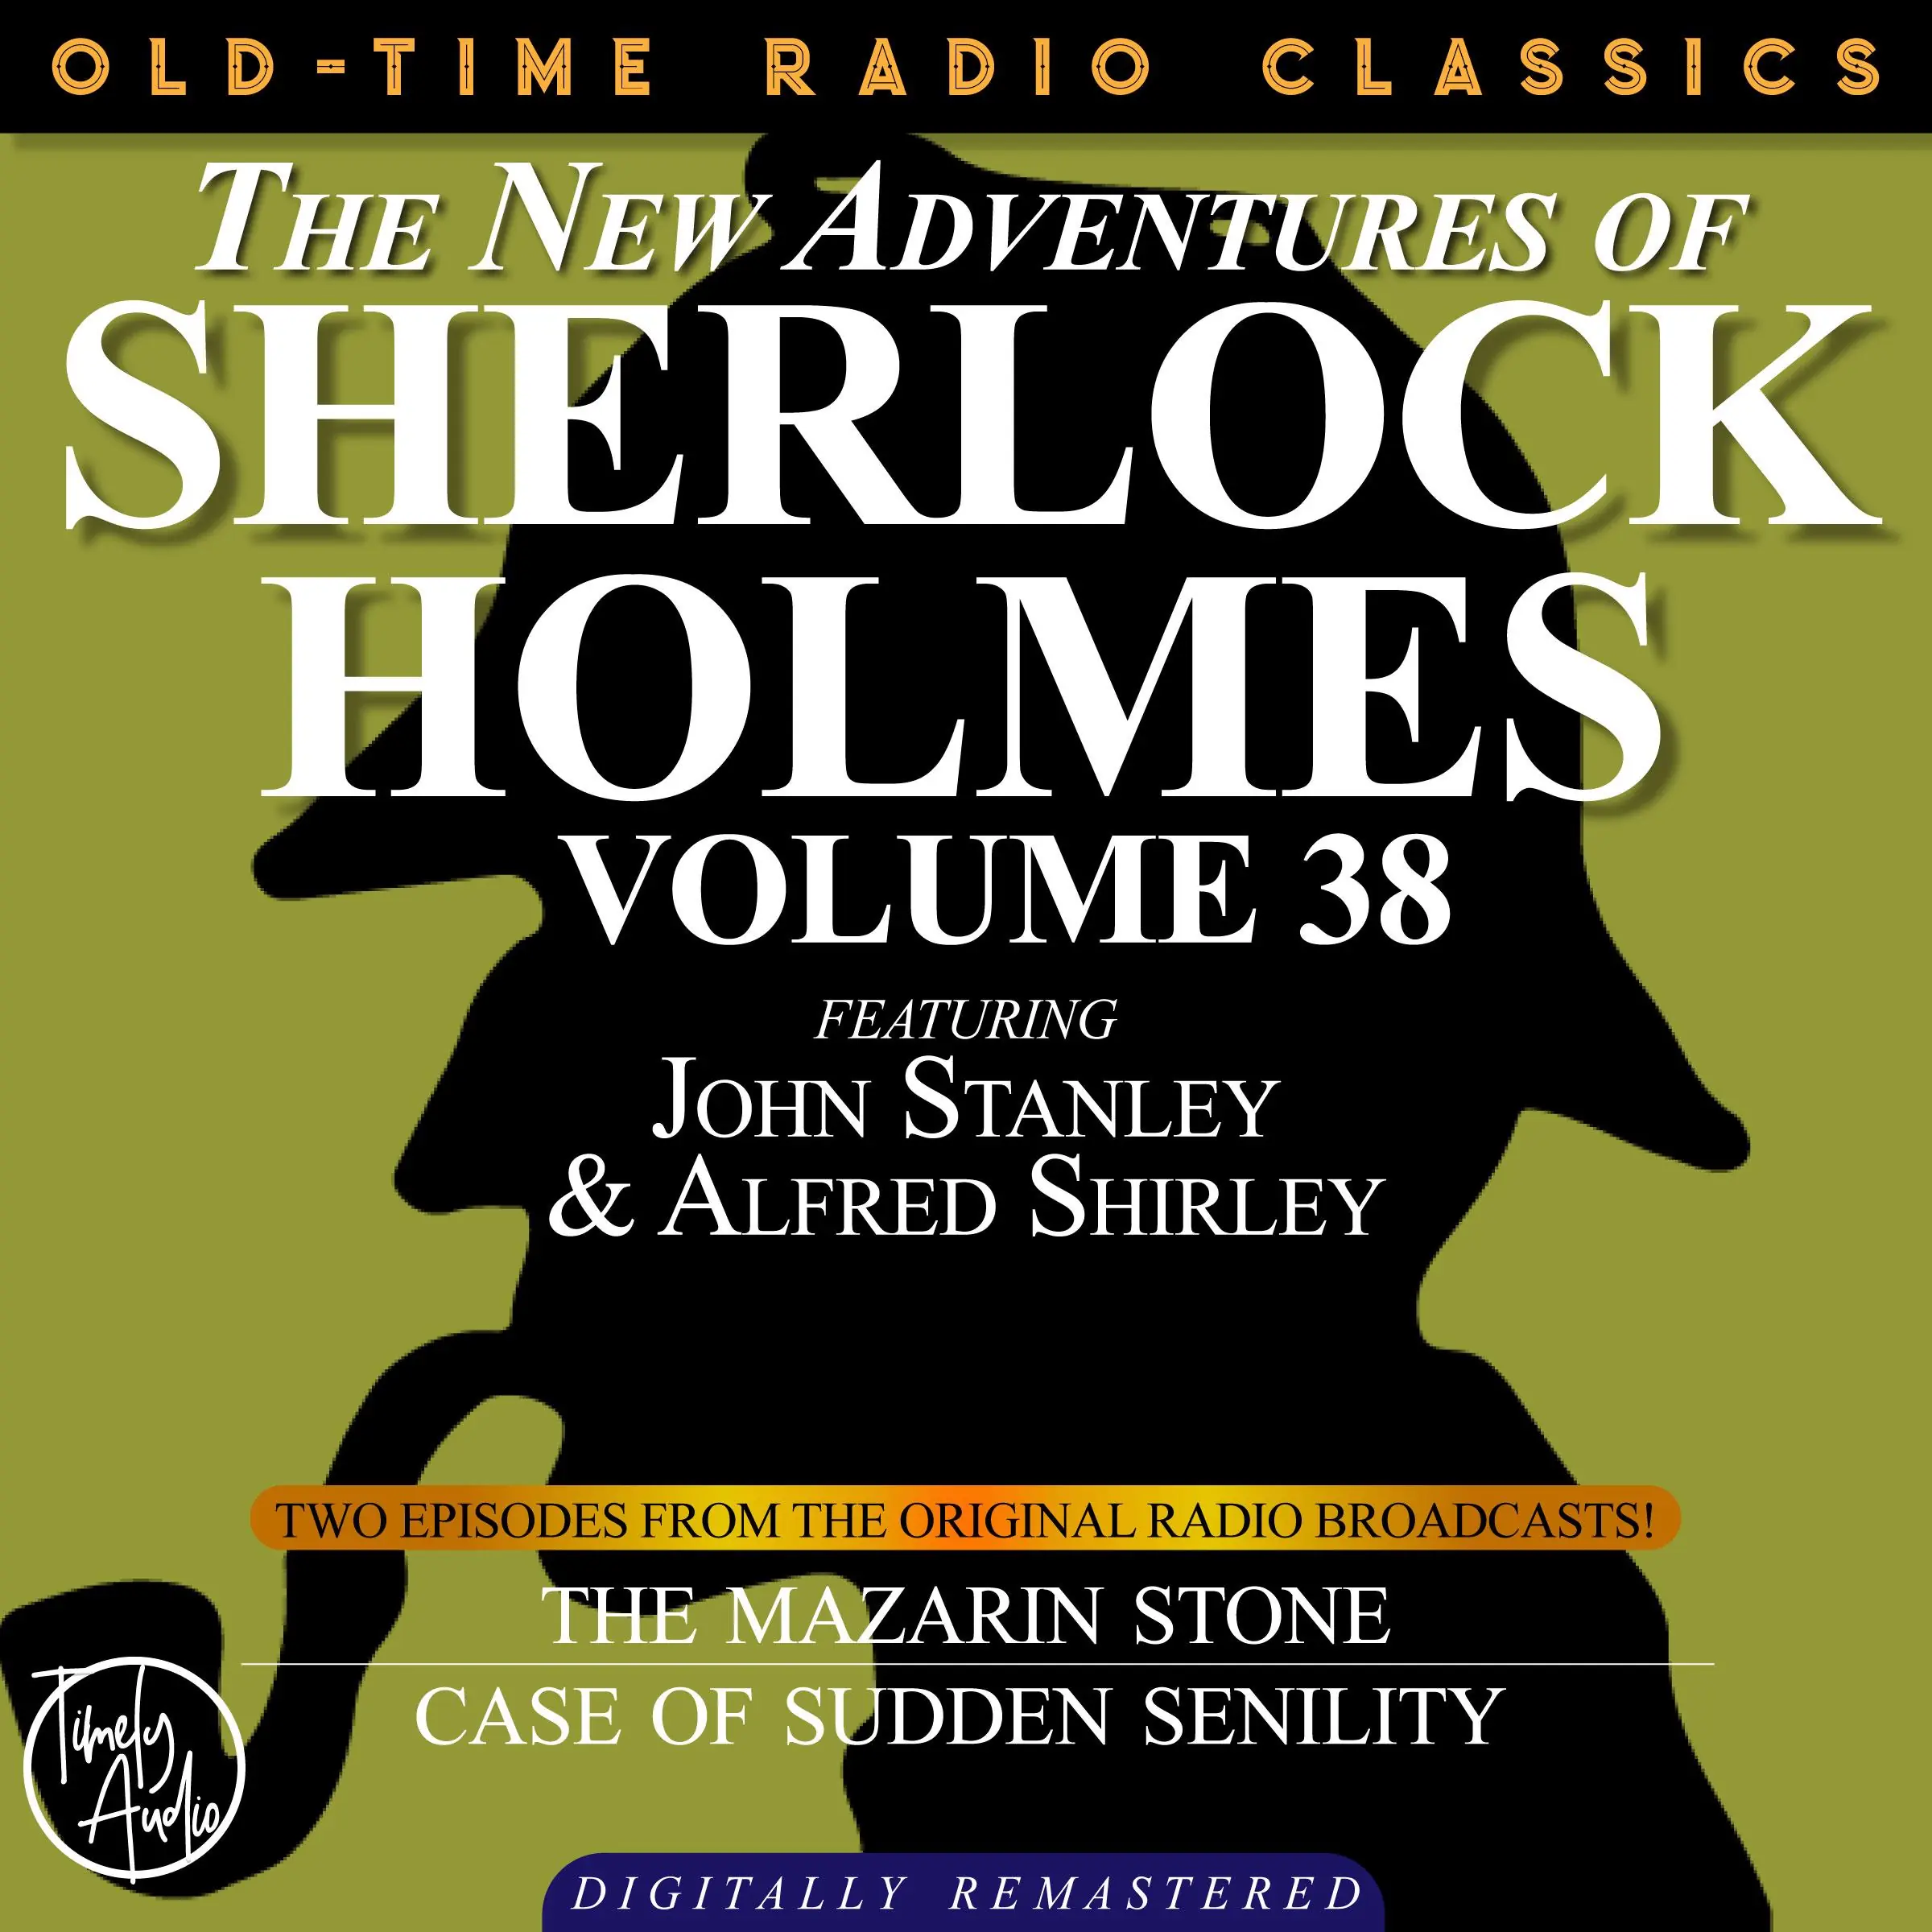 THE NEW ADVENTURES OF SHERLOCK HOLMES, VOLUME 38; EPISODE 1: THE MAZARIN STONE  EPISODE 2: THE CASE OF THE SUDDEN SENILITY by Sir Arthur Conan Doyle Audiobook